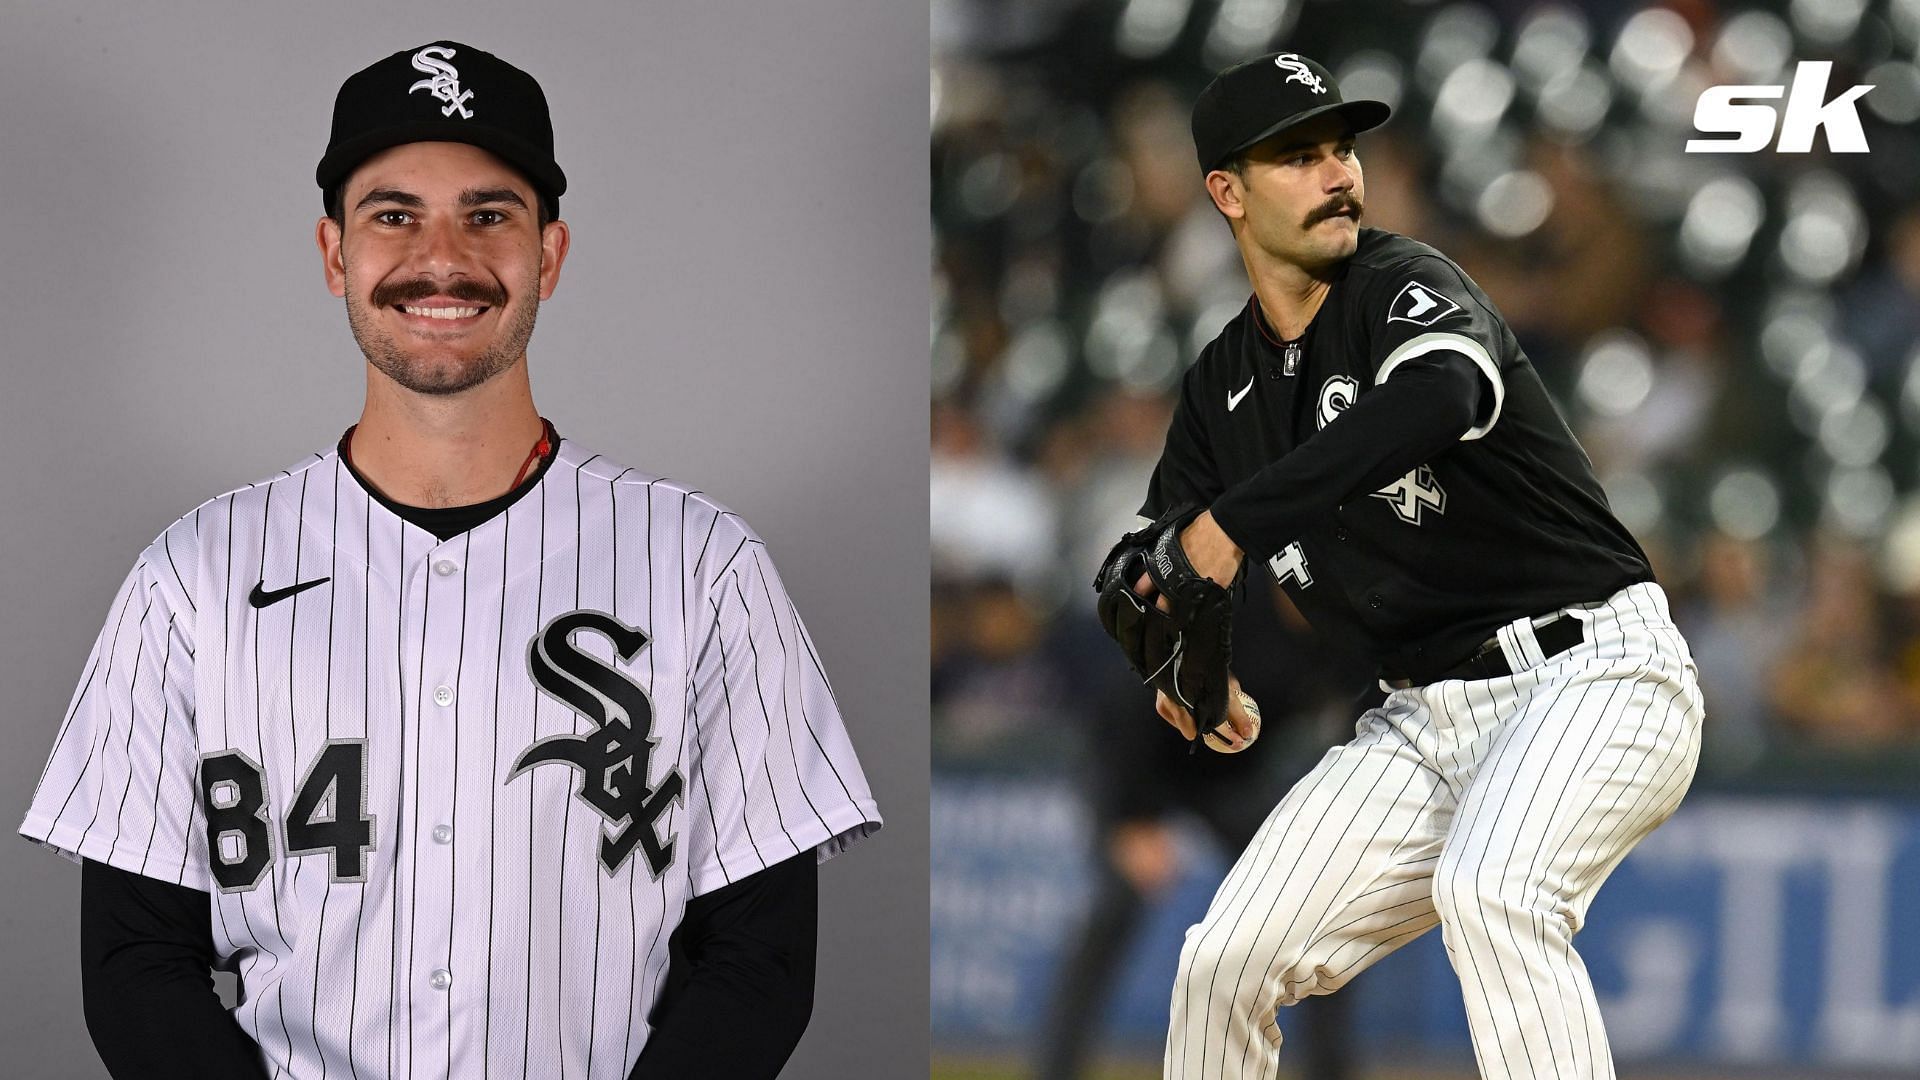 The Chicago White Sox are looking for sizable return for Dylan Cease according to anonymous MLB GM